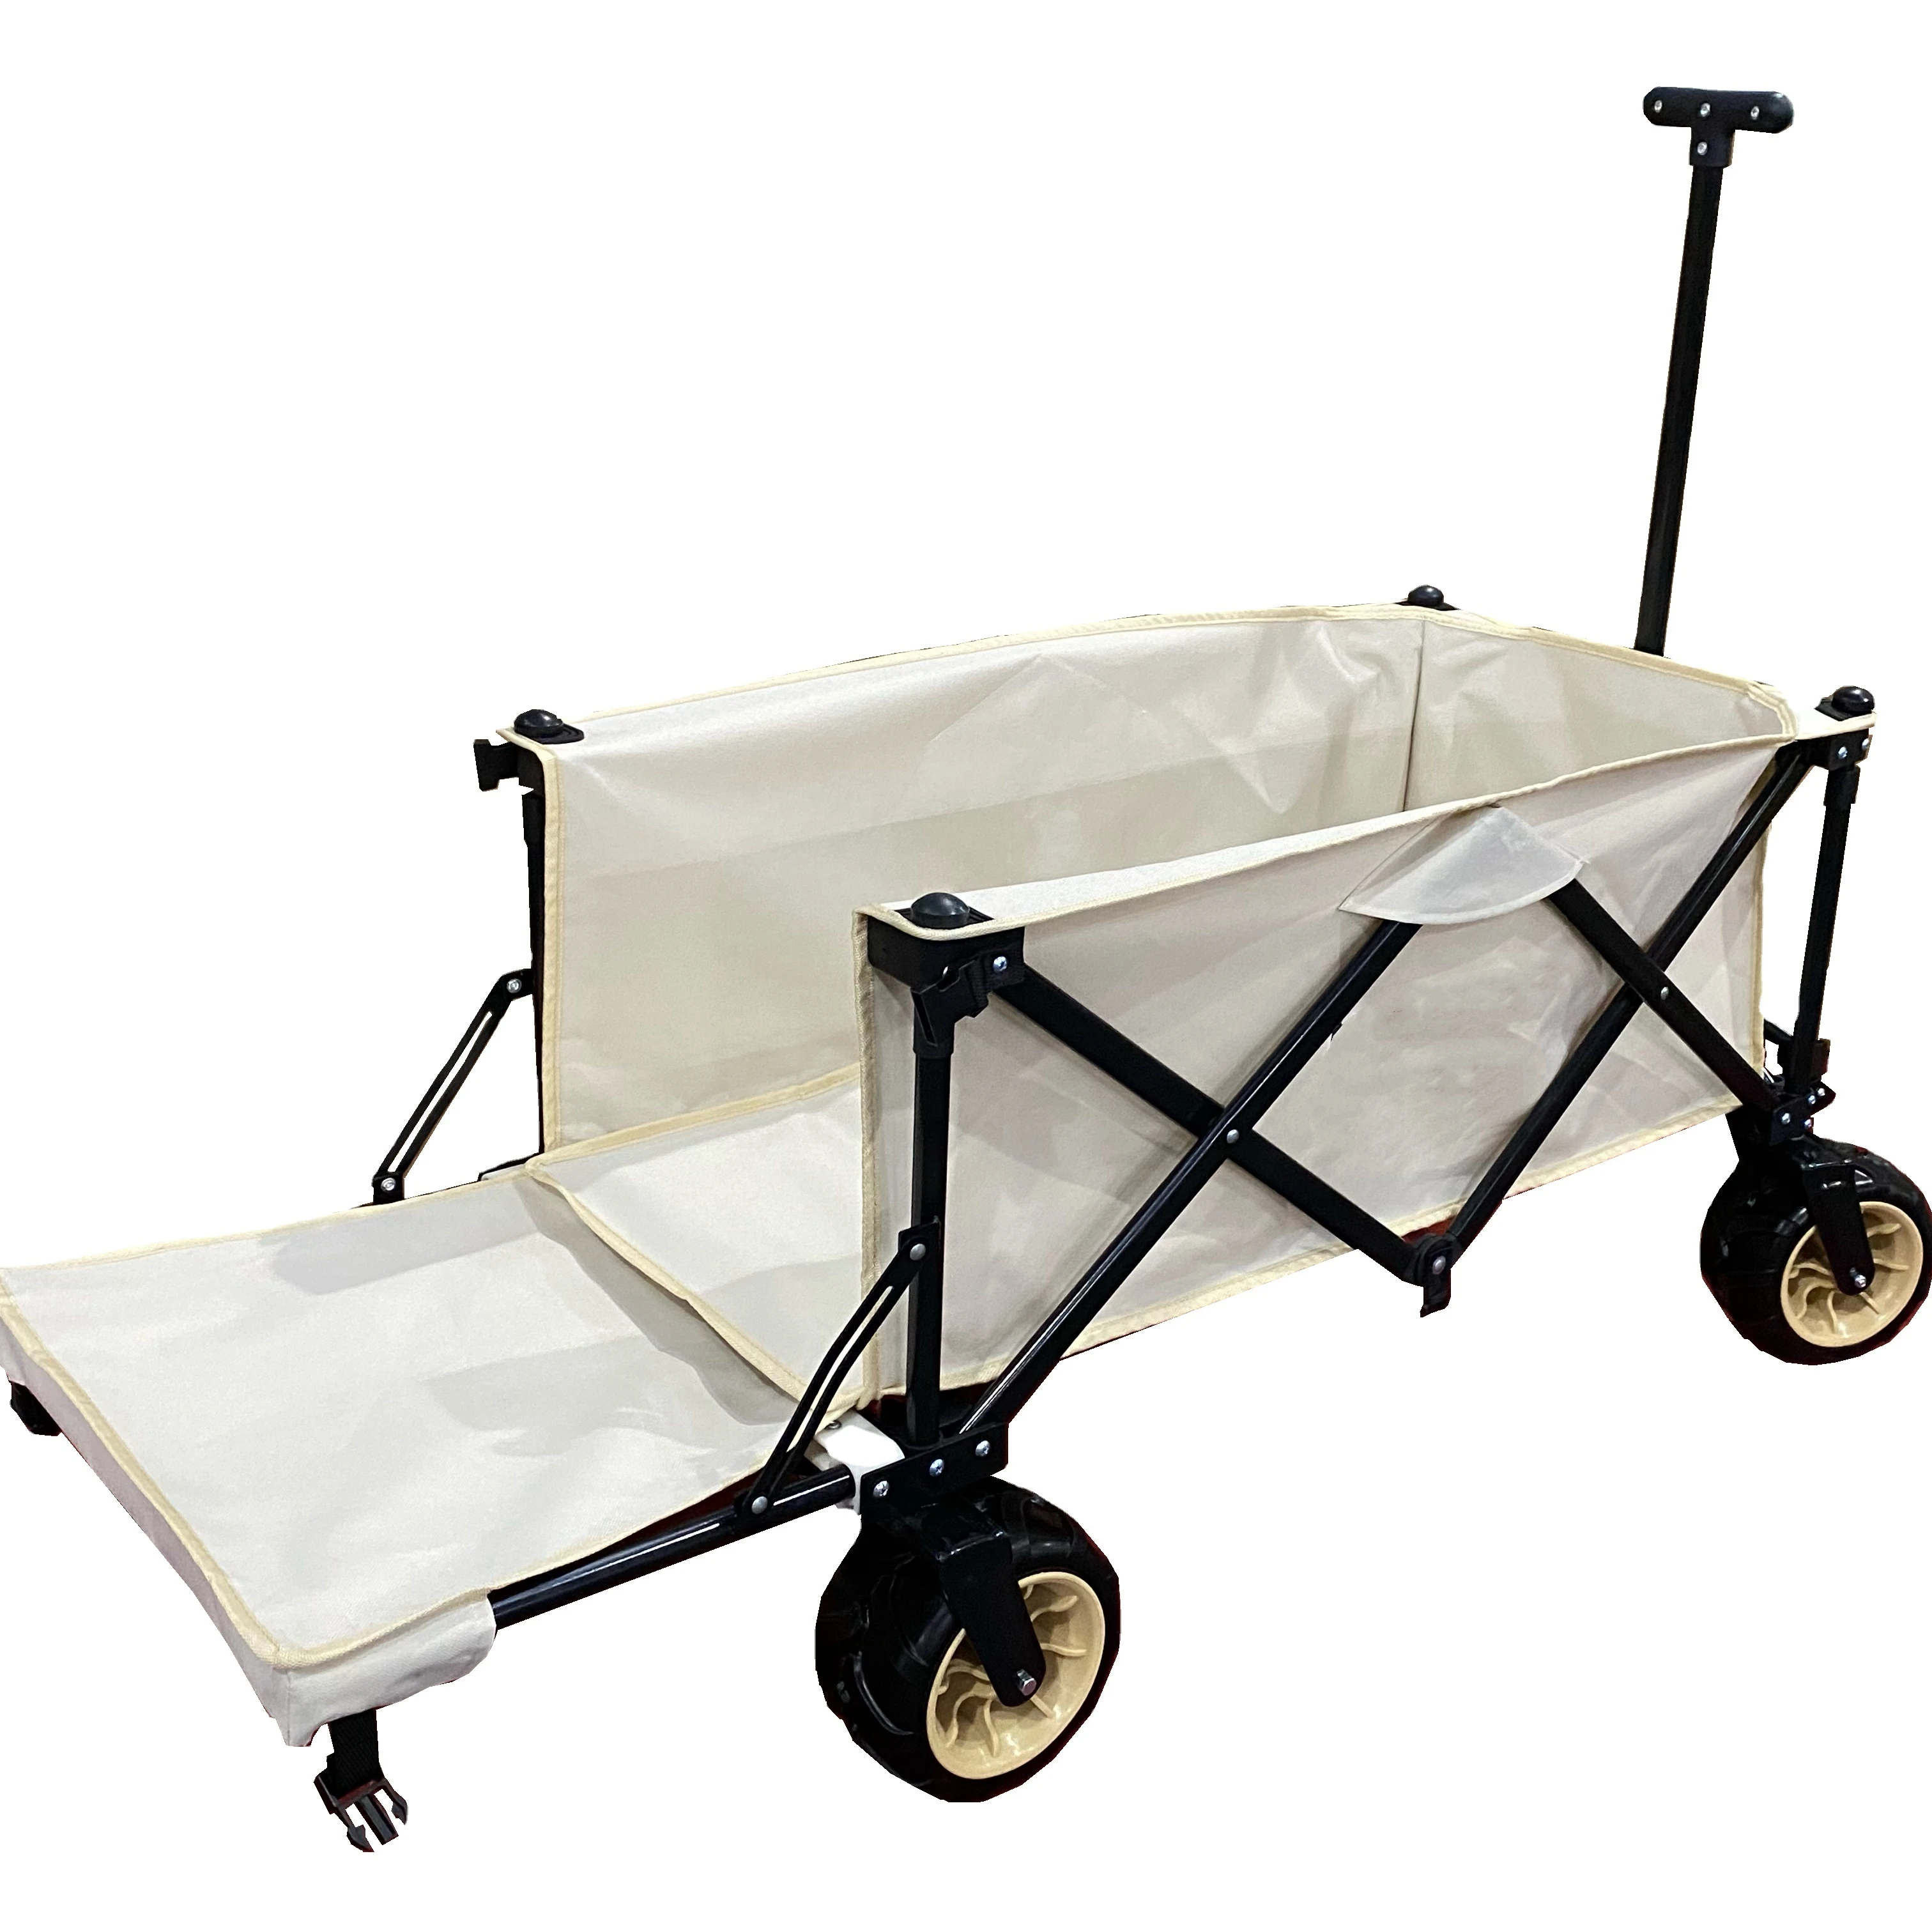 Details about   YSSOA Folding & Rolling Collapsible Garden Cart 220lbs Weight Capacity w/Wheels